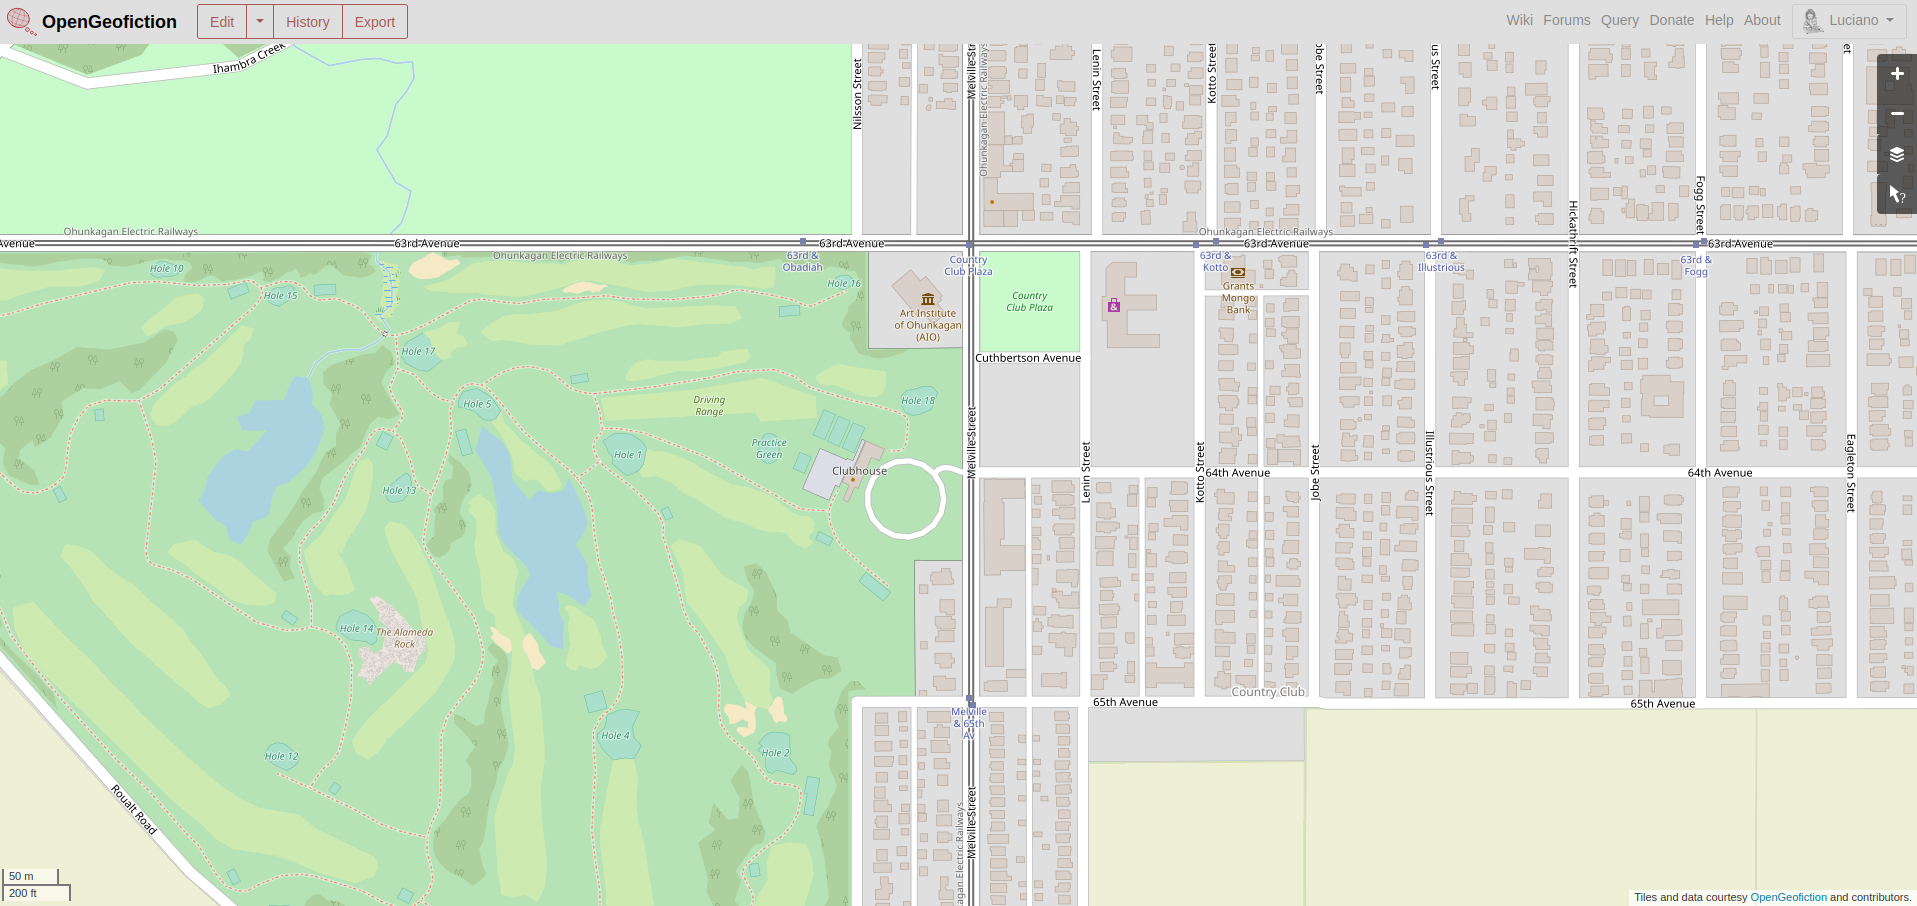 Screenshot of the map window on the OpenGeofiction site, showing an area mapped of a neighborhood called Country Club Alameda with lots of detail, including a golf course.